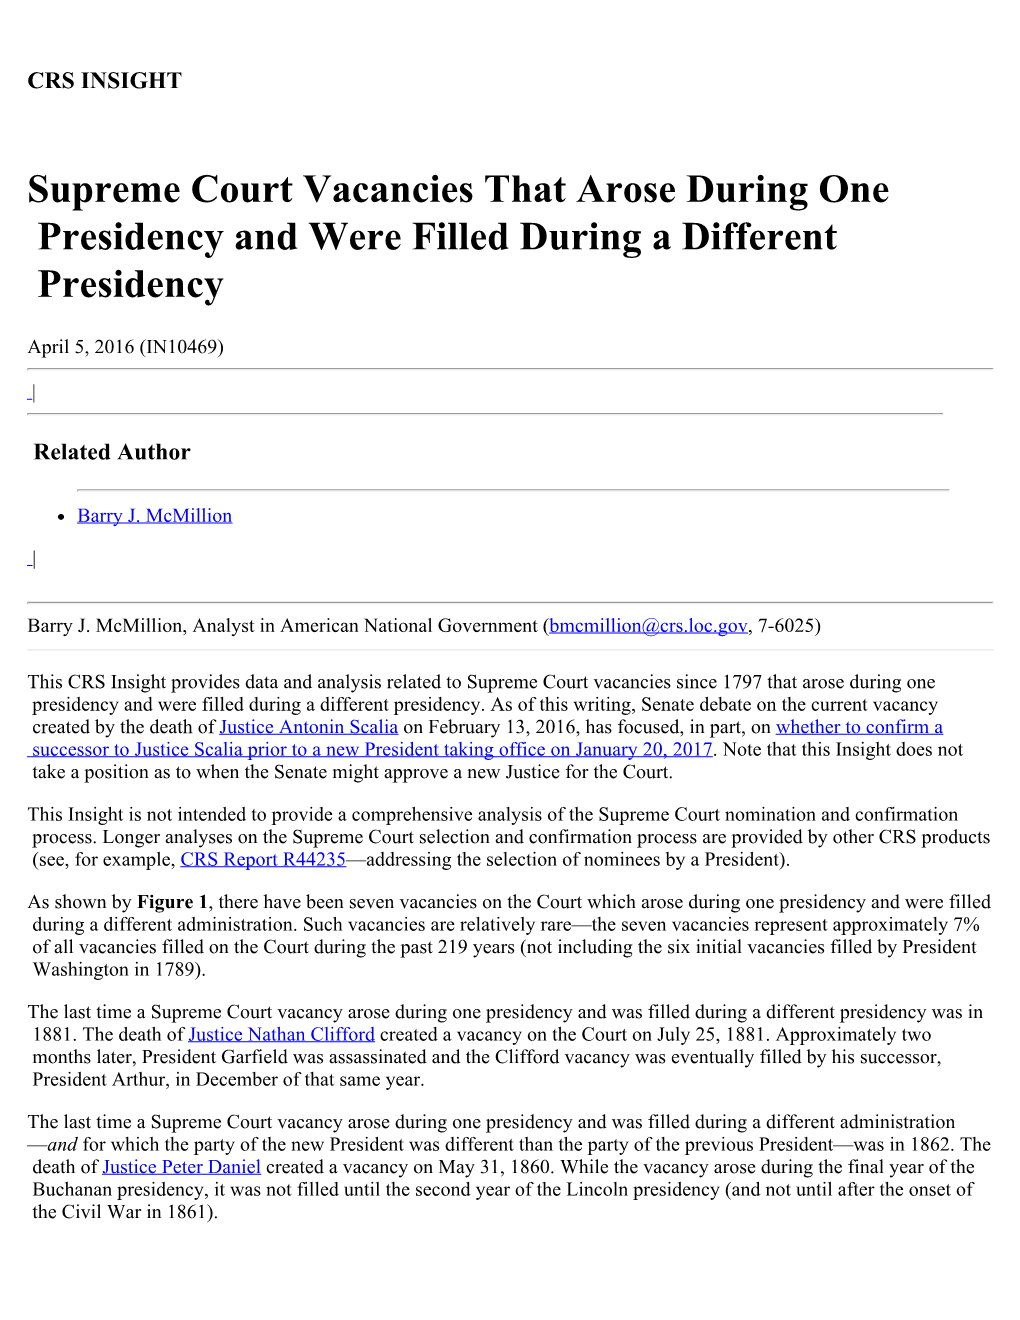 Supreme Court Vacancies That Arose During One Presidency and Were Filled During a Different Presidency